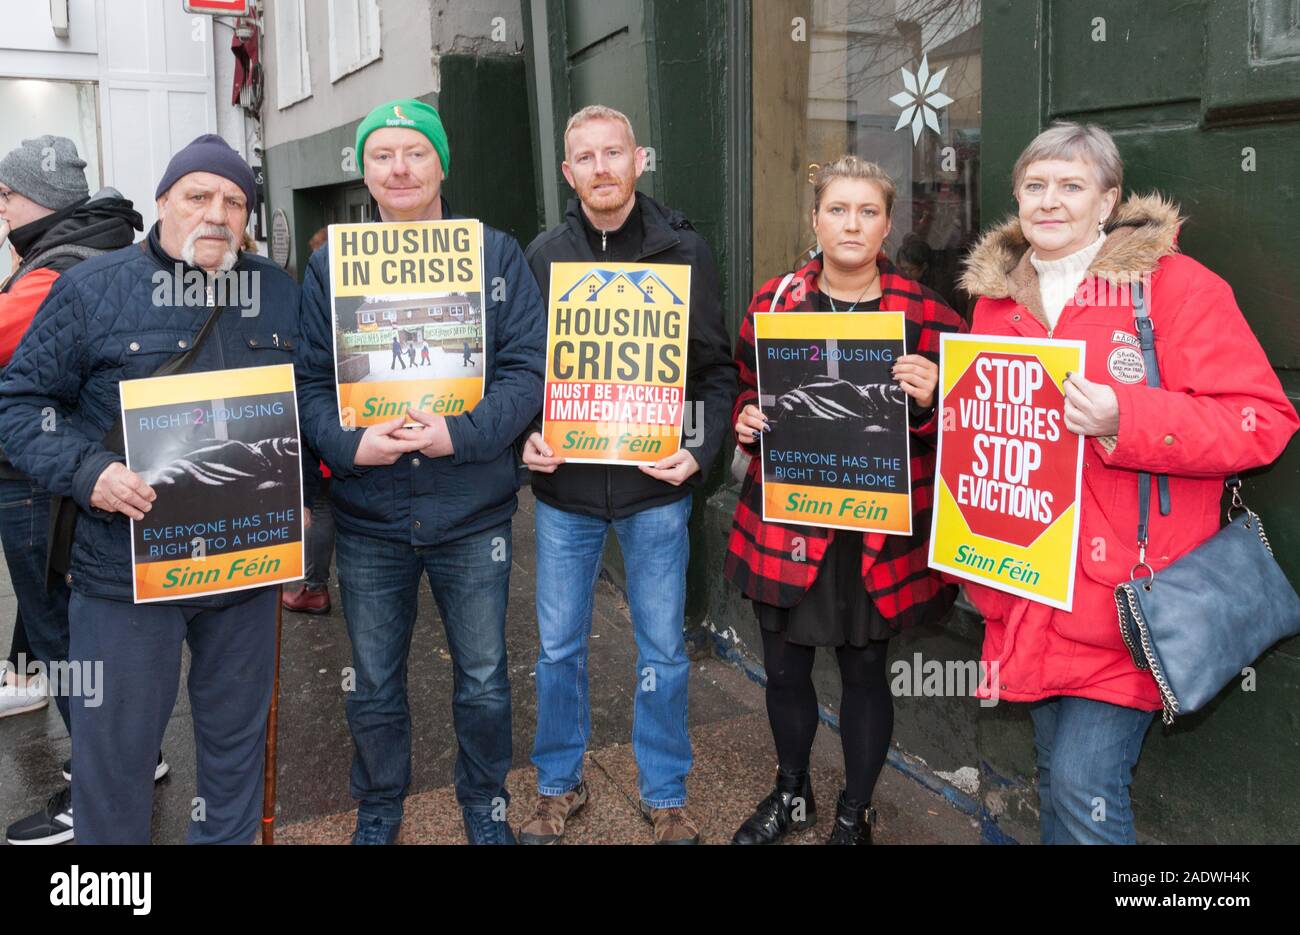 Cork City, Cork, Ireland. 05th December, 2019.  Tom Flynn, Fairhill, Mick Nugent,Hollyhill, Colum Radford, Togher. Lee Nagle, Blackrock and Anne McKiernan, Bandon at the housing protest march organised by the Right2Housing group which was held in Cork and highlights the issue of the housing crisis and homelessness in Cork City, Ireland. - Credit; David Creedon / Alamy Live News Stock Photo